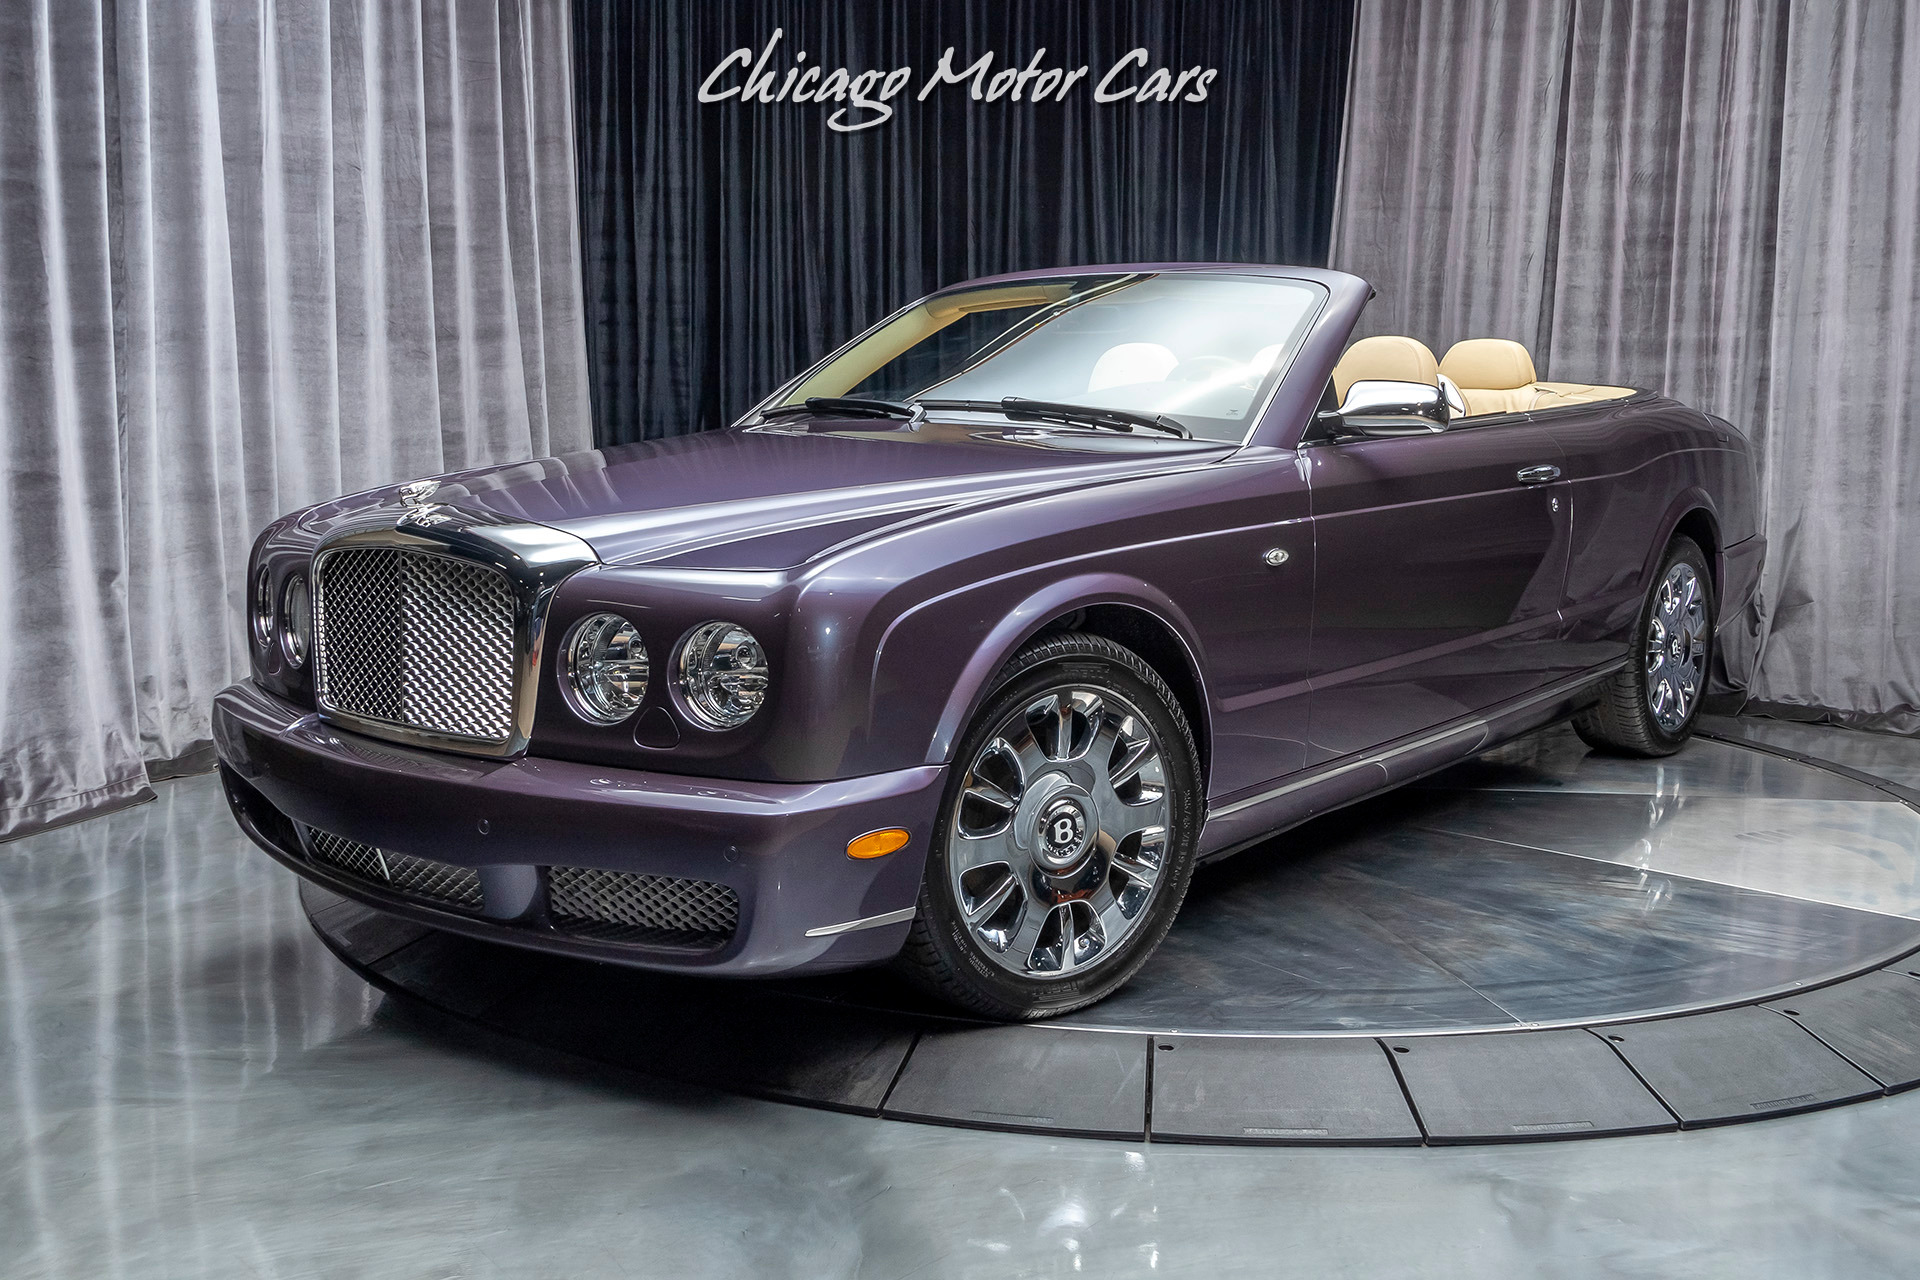 Used 2008 Bentley Azure Convertible Original MSRP $341K+ ULTRASONIC PARK  DISTANCE CONTROL! RARE! For Sale (Special Pricing) | Chicago Motor Cars  Stock #16898